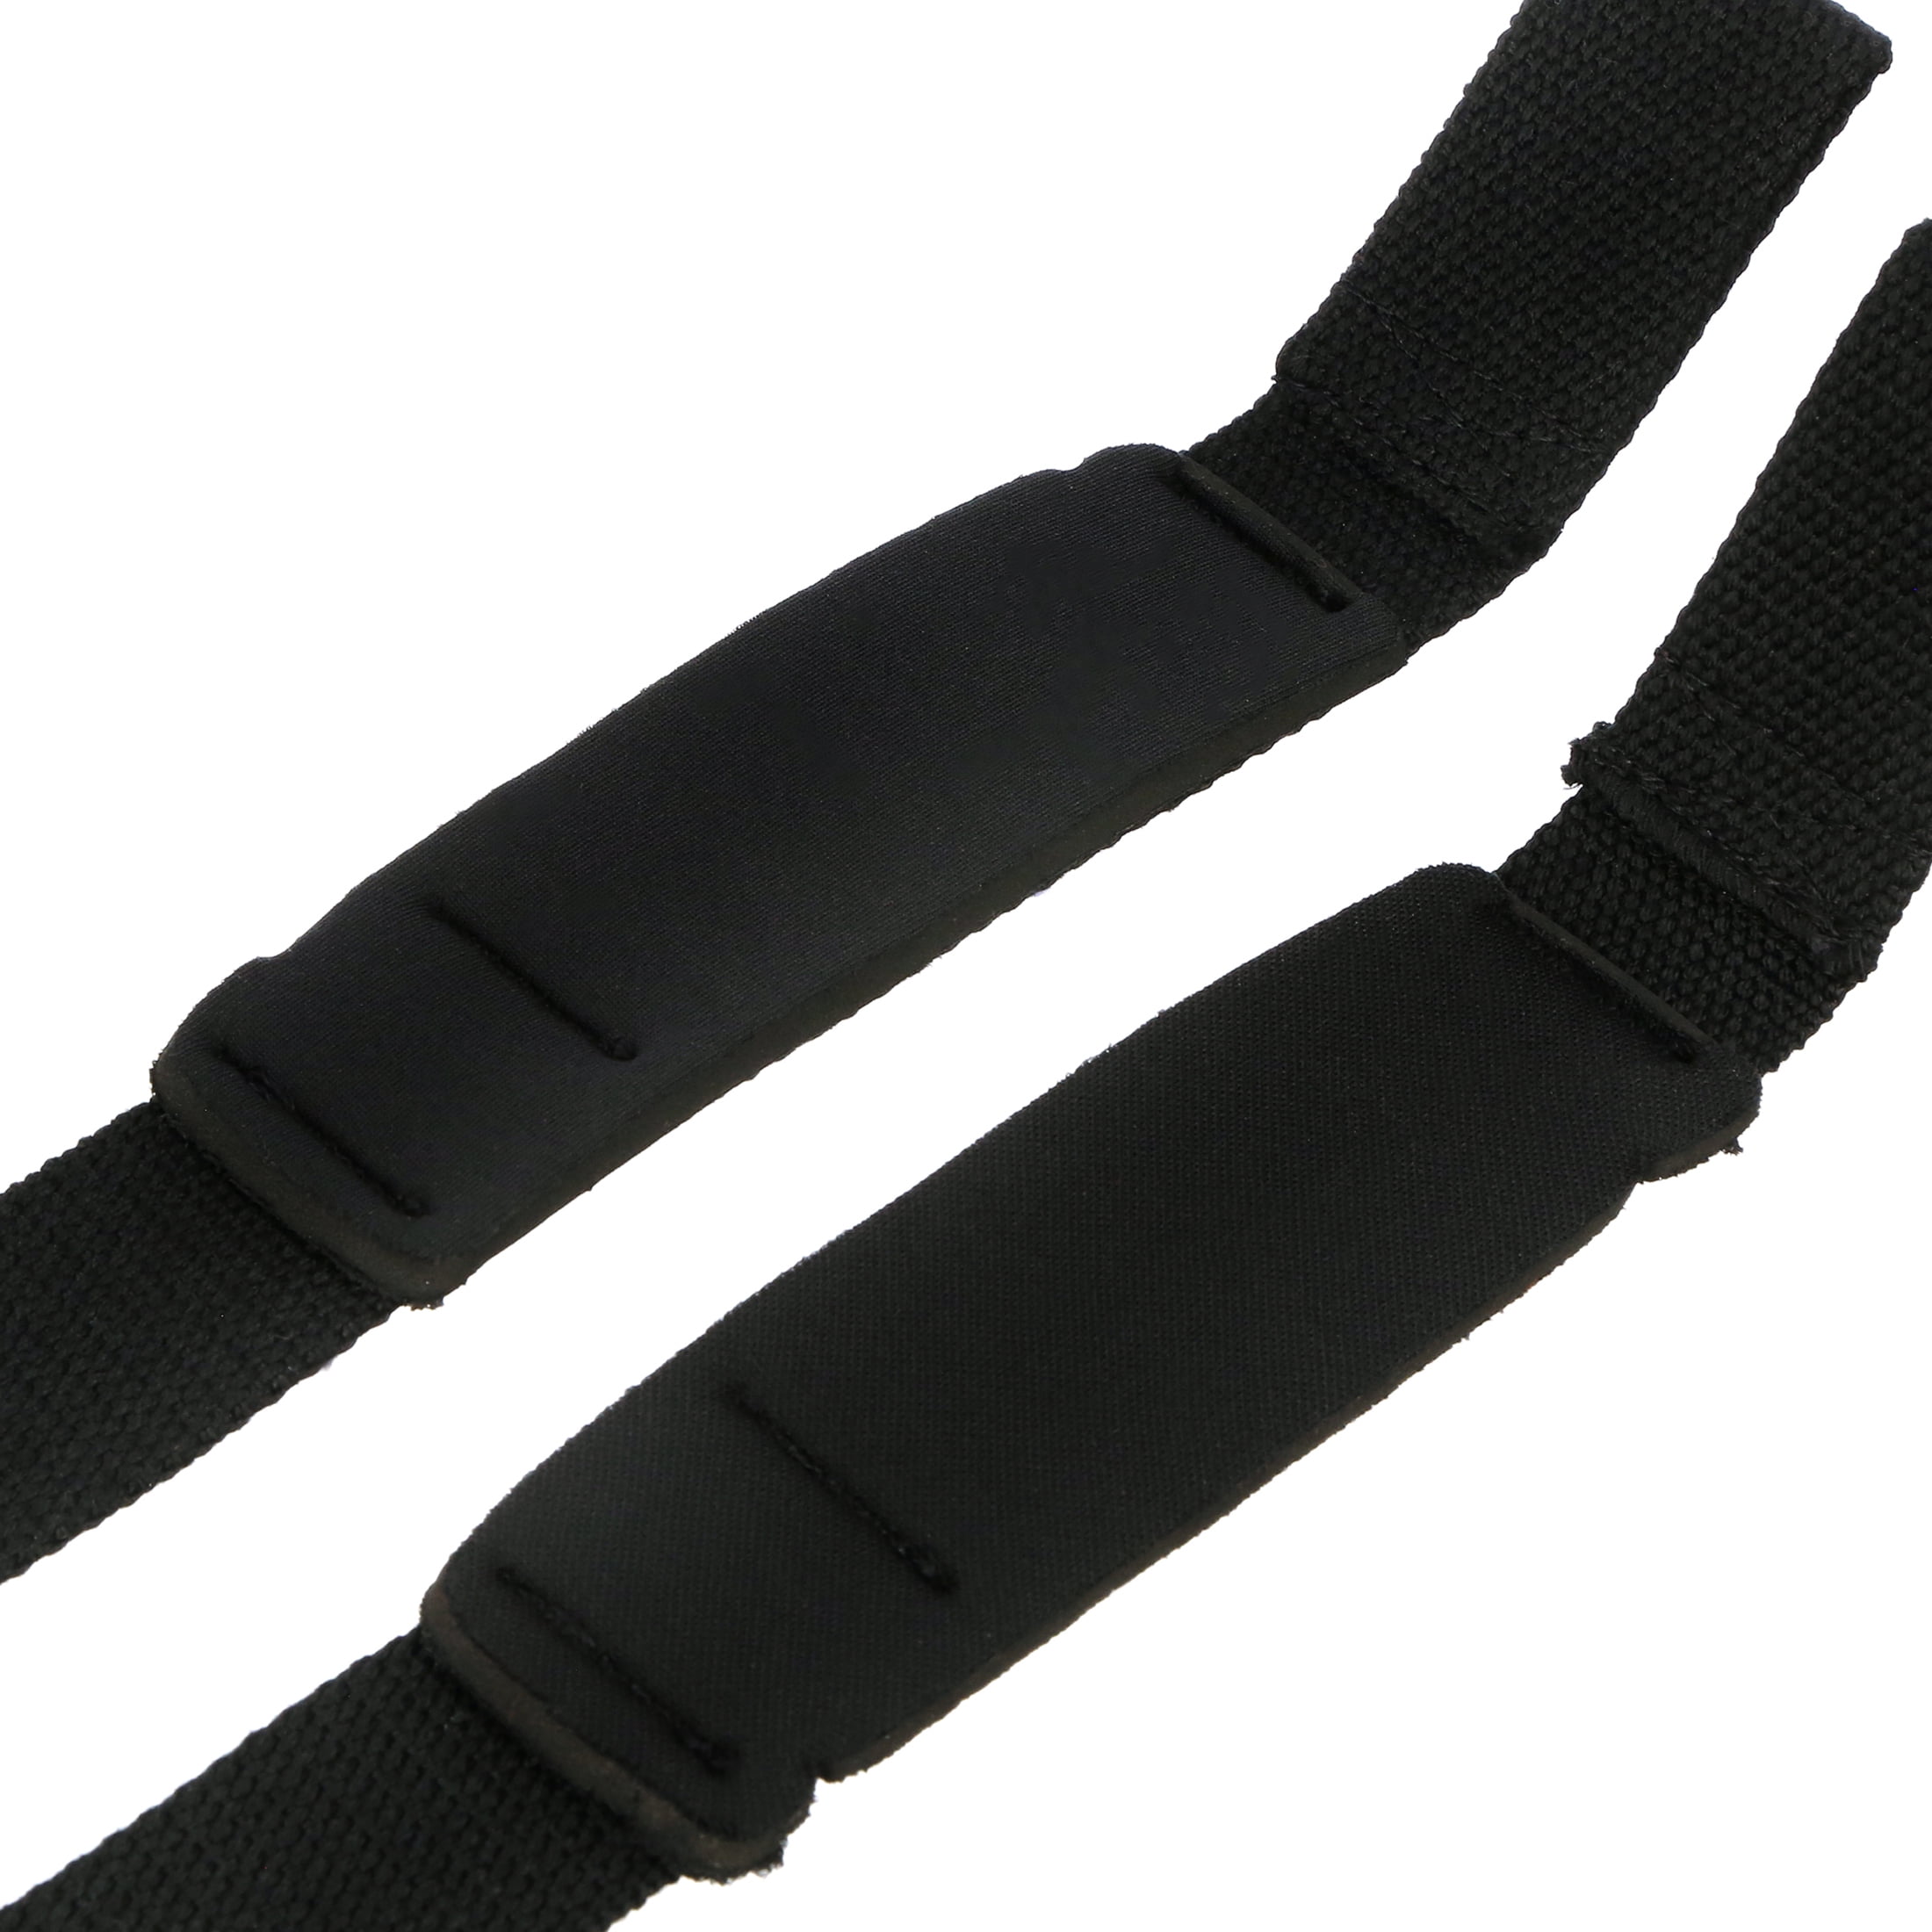 Harbinger Padded Lifting Straps for Weightlifting and Strength Training 